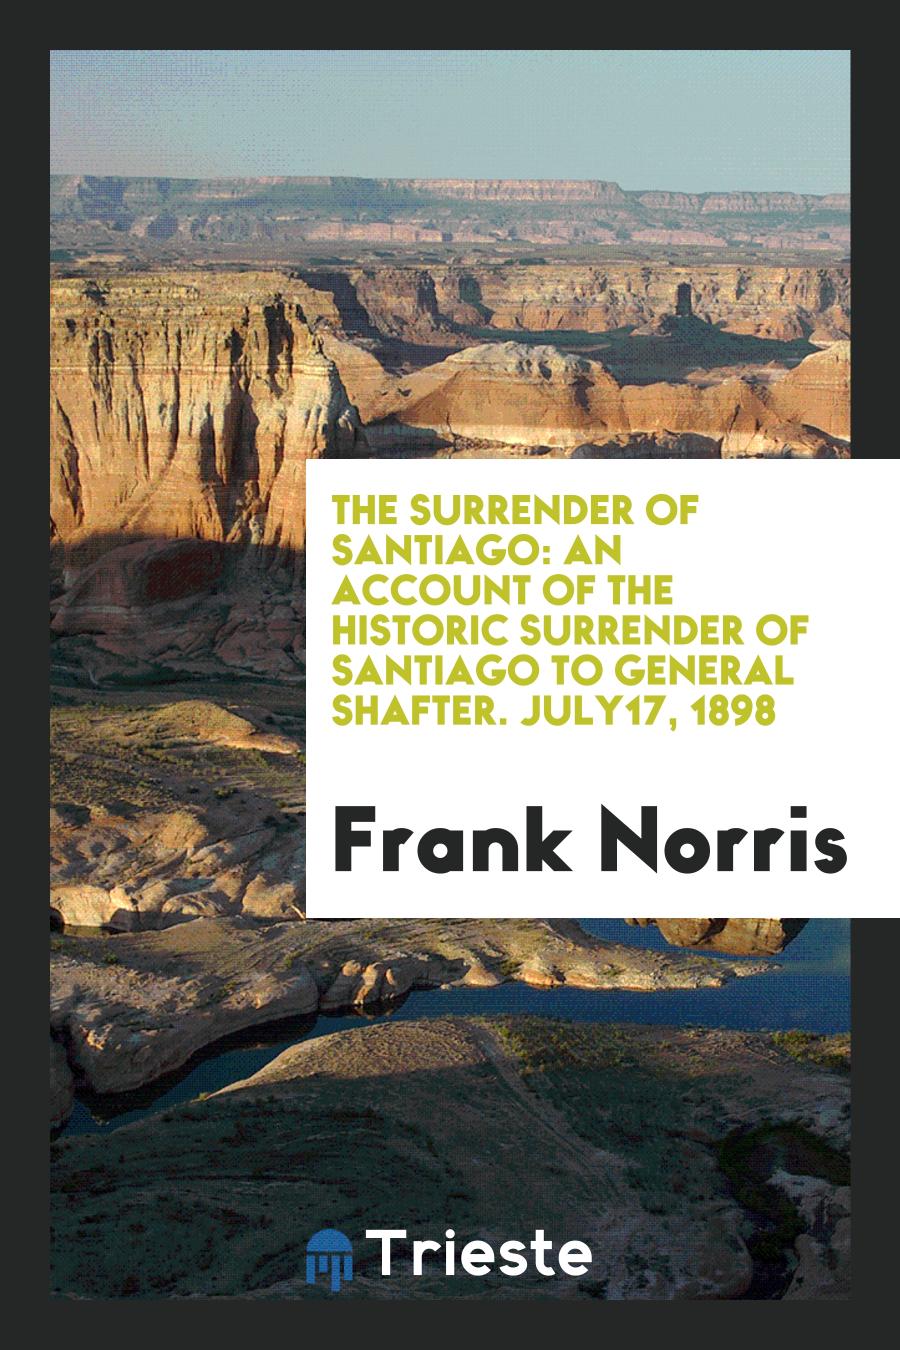 The Surrender of Santiago: An Account of the Historic Surrender of Santiago to General Shafter. July17, 1898